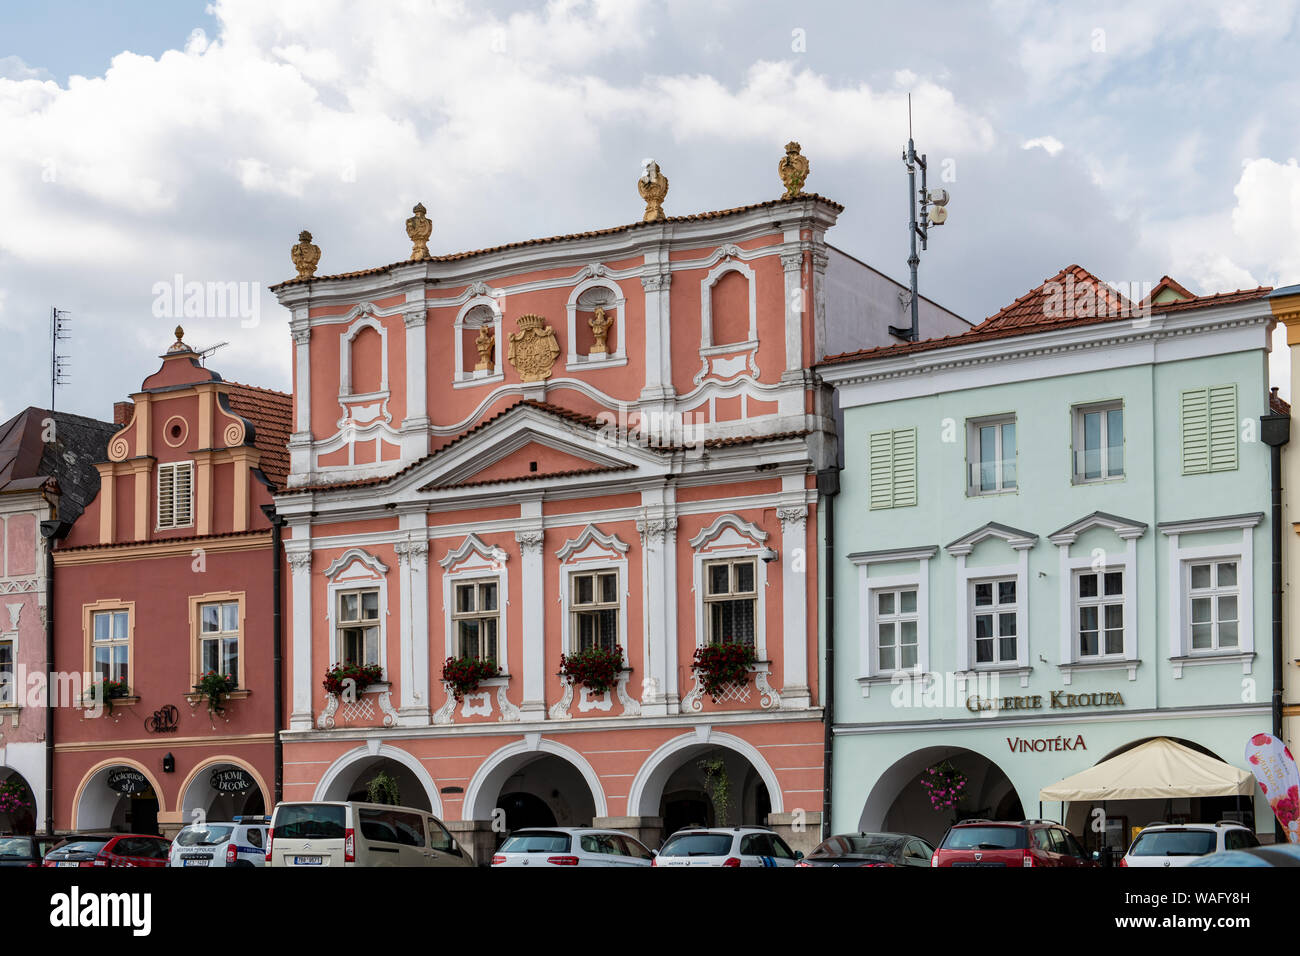 Colorful buildings line the streets of Litomysl, Czech Republic Stock Photo